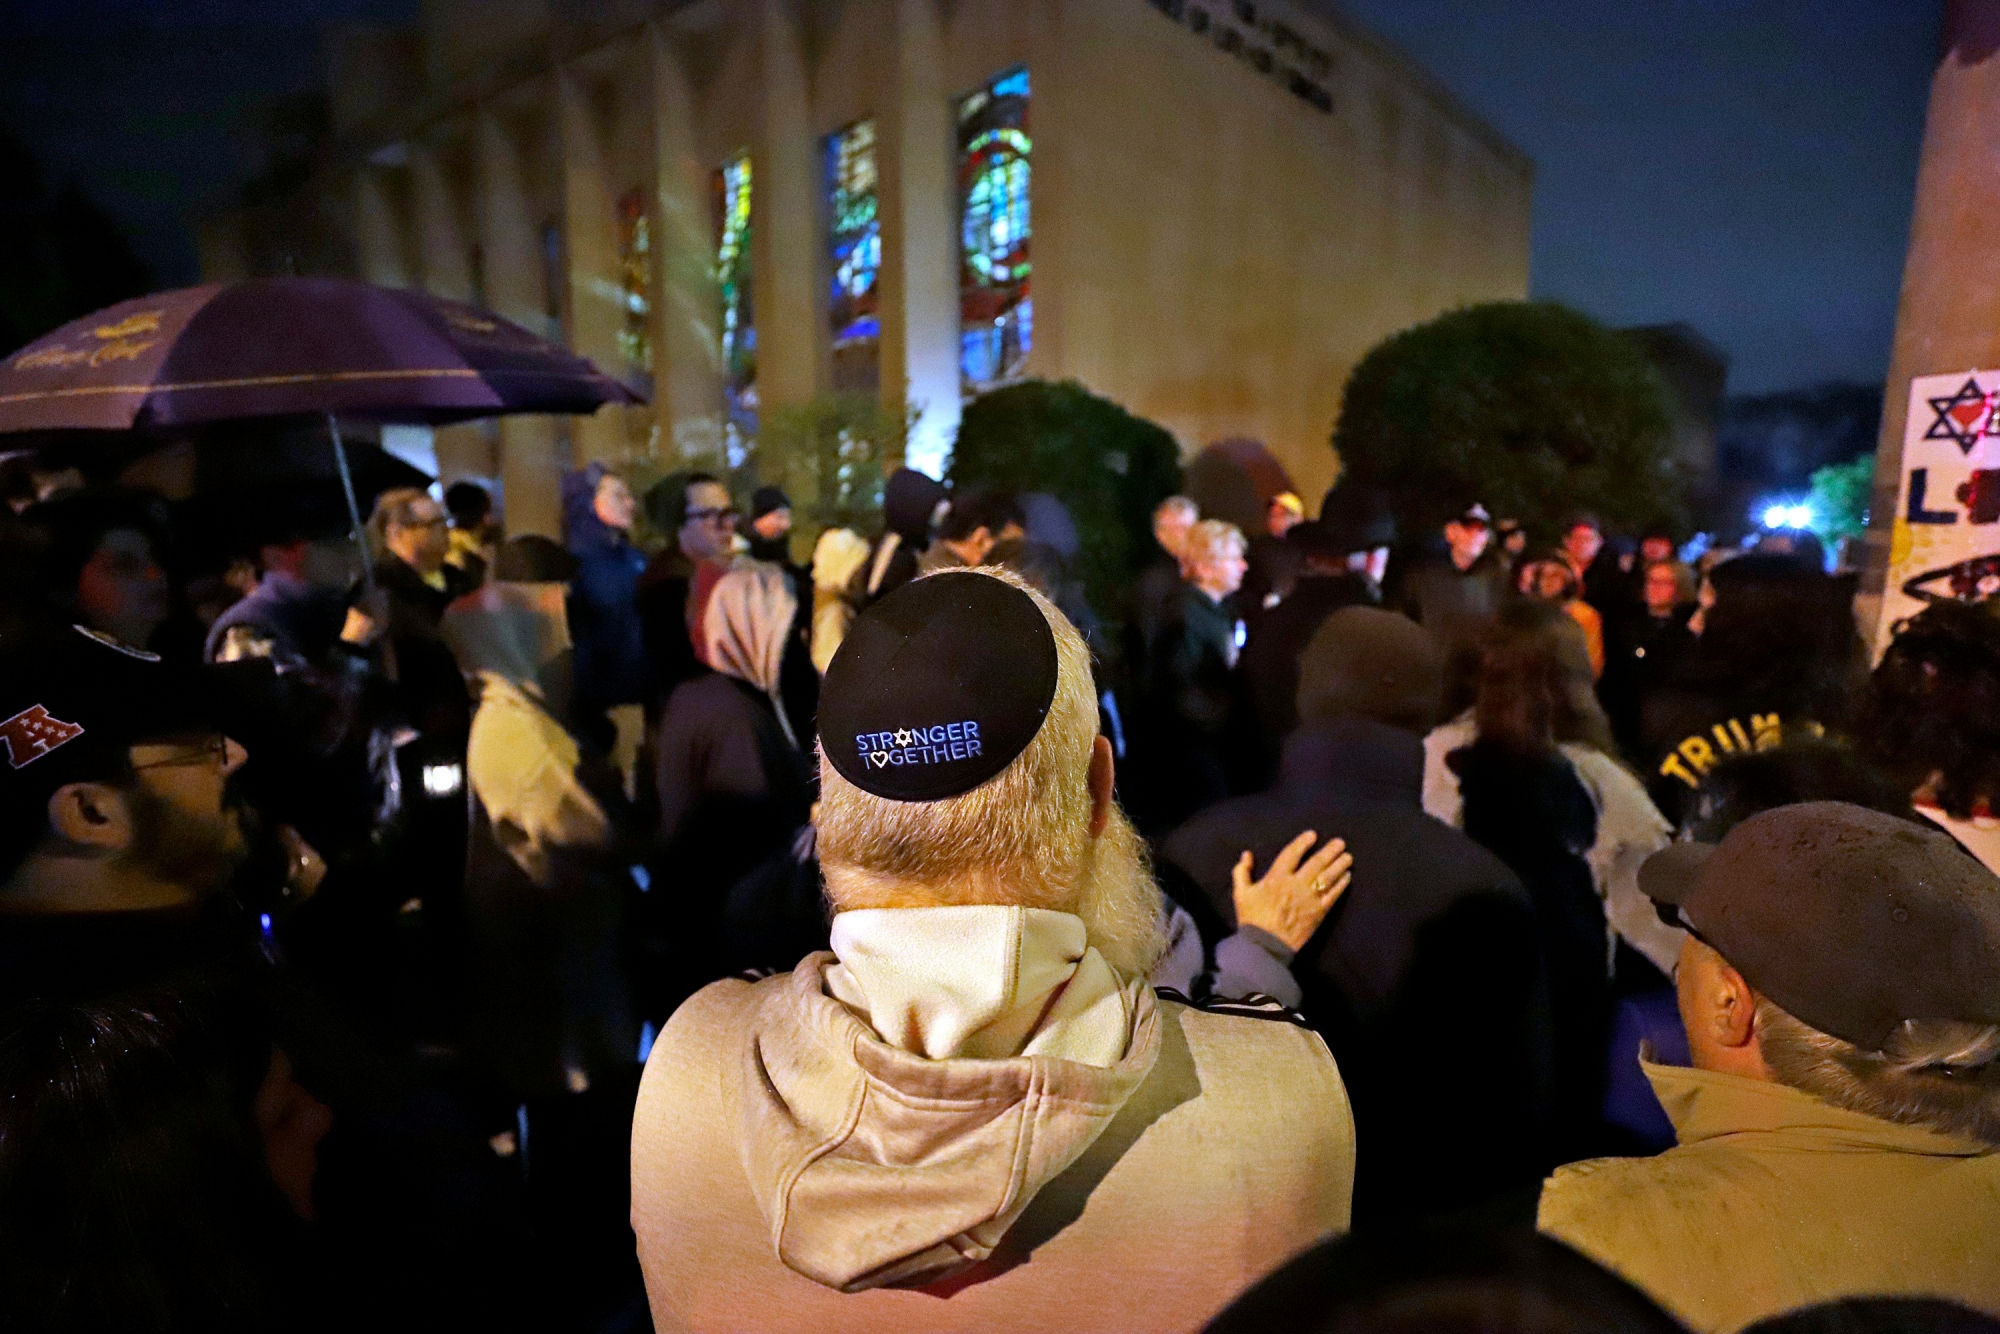 A group gathers outside the Tree of Life Synagogue for a vigil to honor the victims of the Saturday attack on a synagogue in California, Saturday April 27, 2019, in the Squirrel Hill neighborhood of Pittsburgh. It is six months to the day that a gunman shot and killed 11 people while they worshipped at the Tree of Life Synagogue on Oct. 27, 2018. (AP Photo/Gene J. Puskar) Synagogue Shooting California Pittsburgh